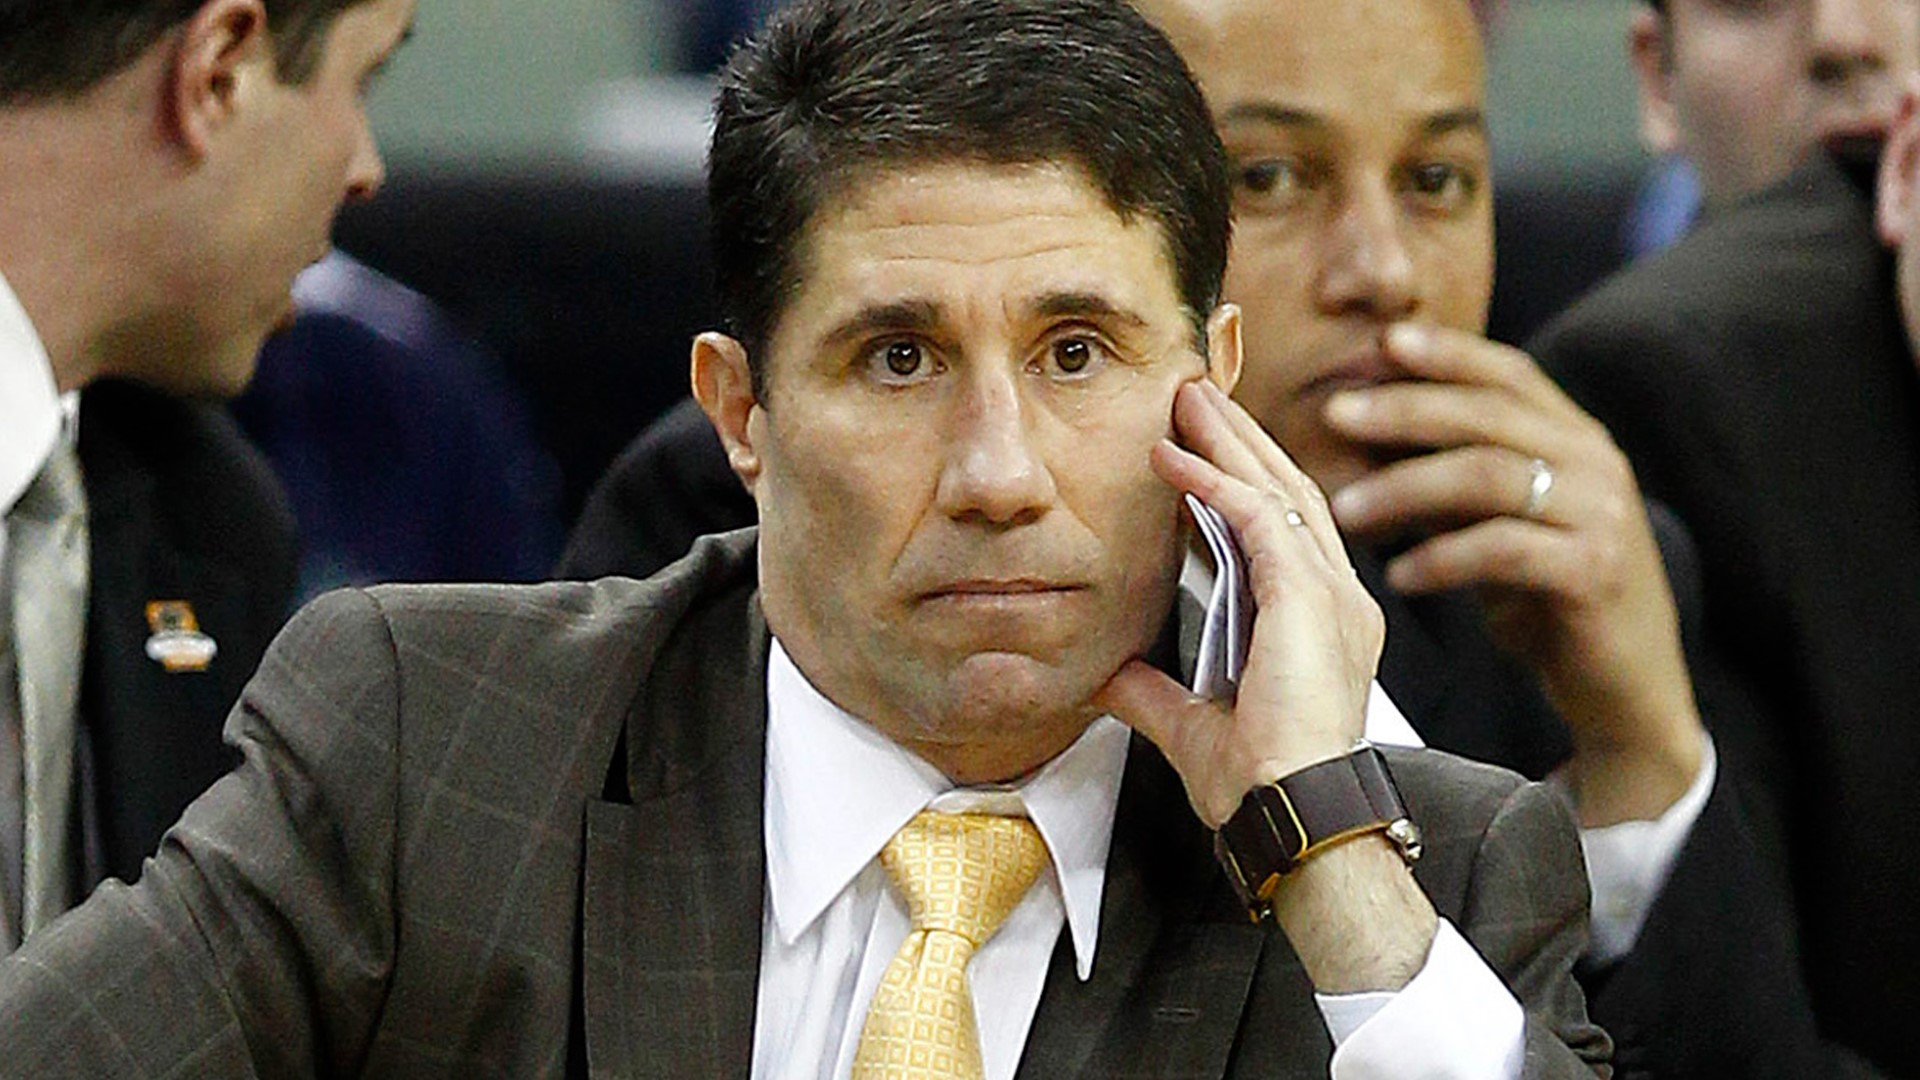 Former University of Louisville men's basketball assistant coach Dino Gaudio has entered a guilty plea in federal court